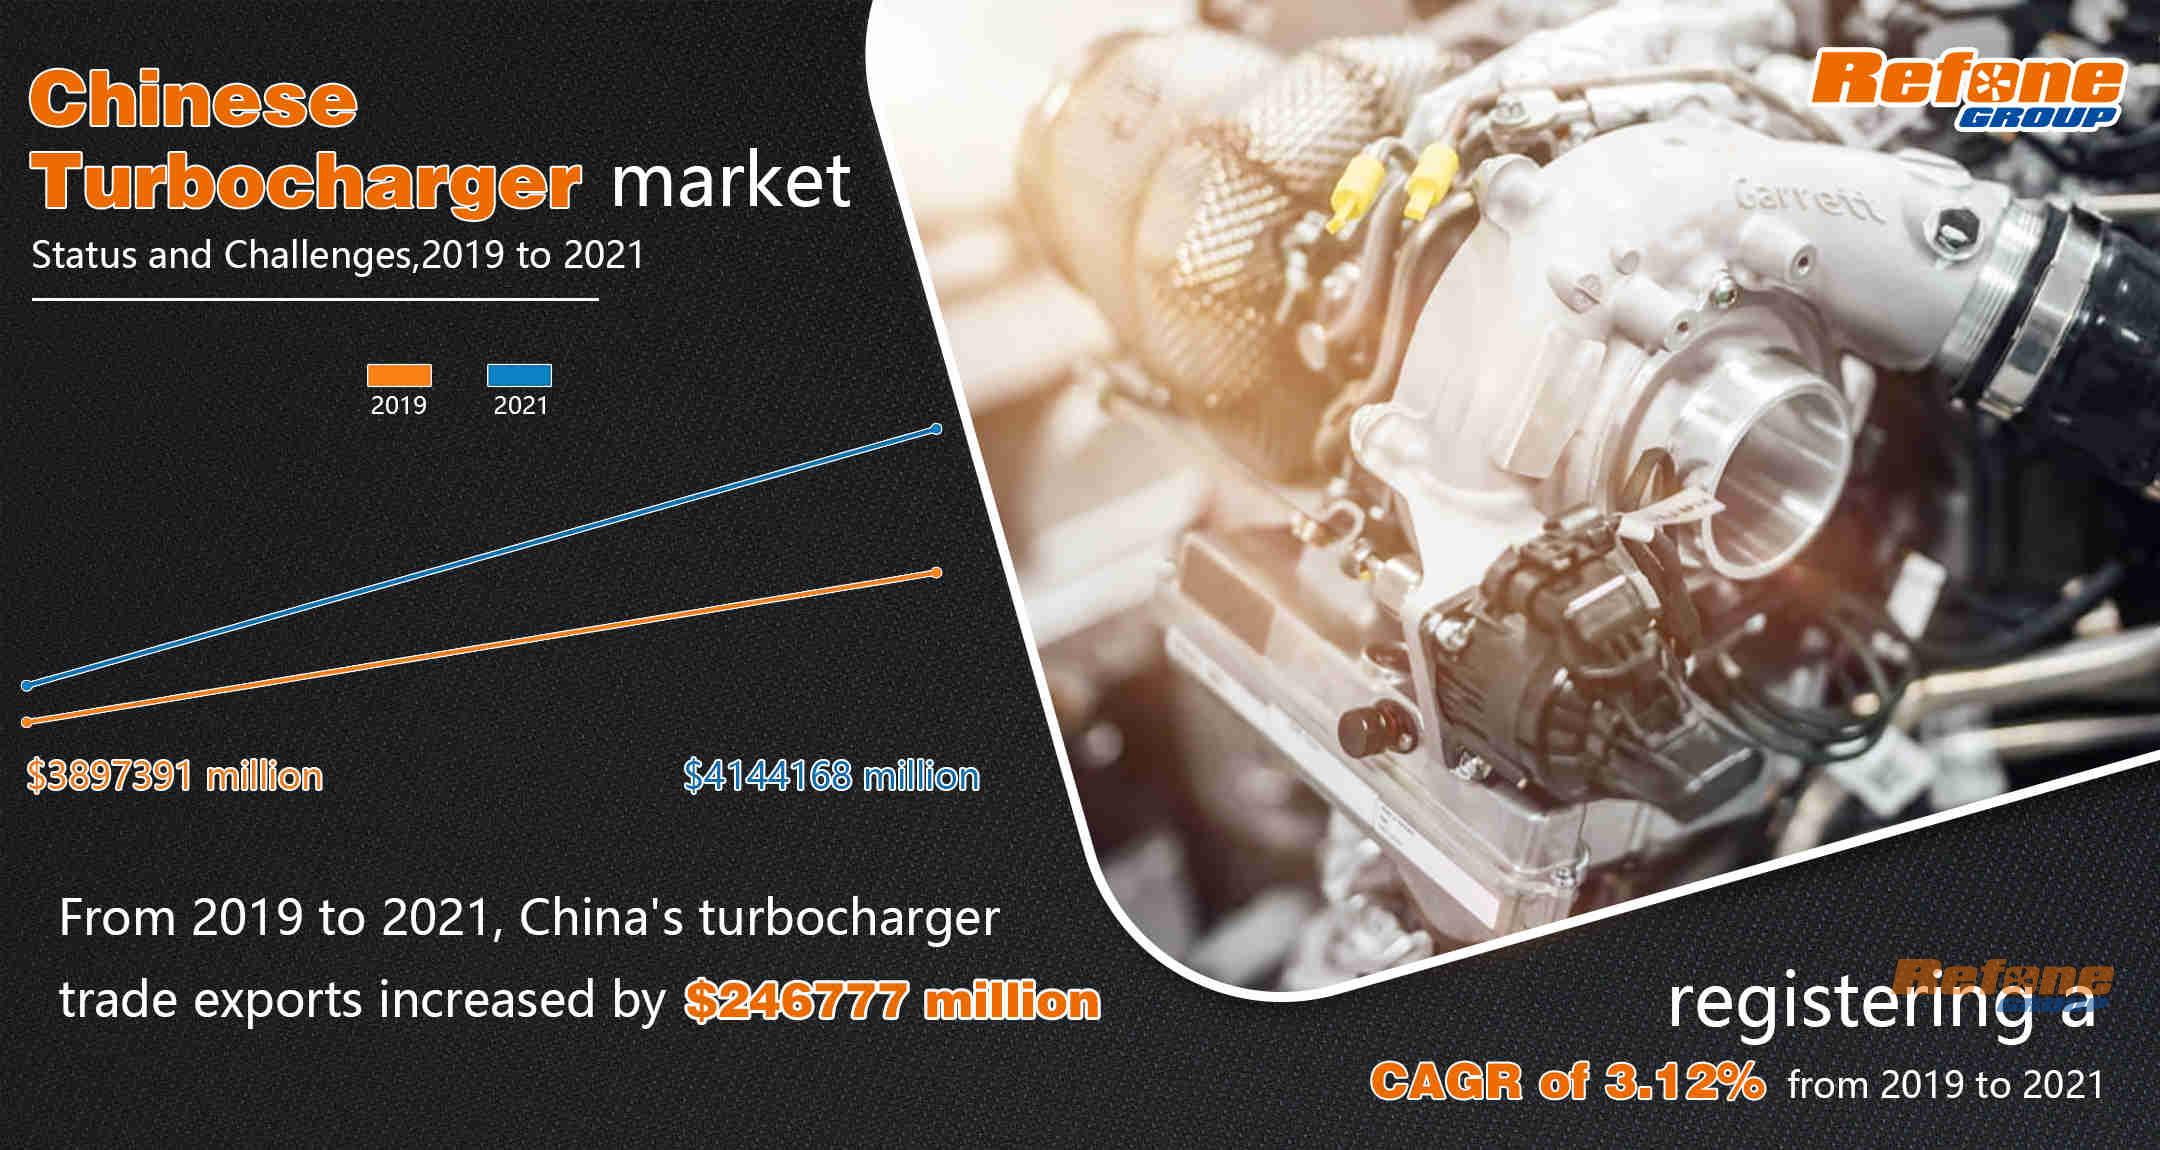 Challenges of the ChineseTurbocharger supply market